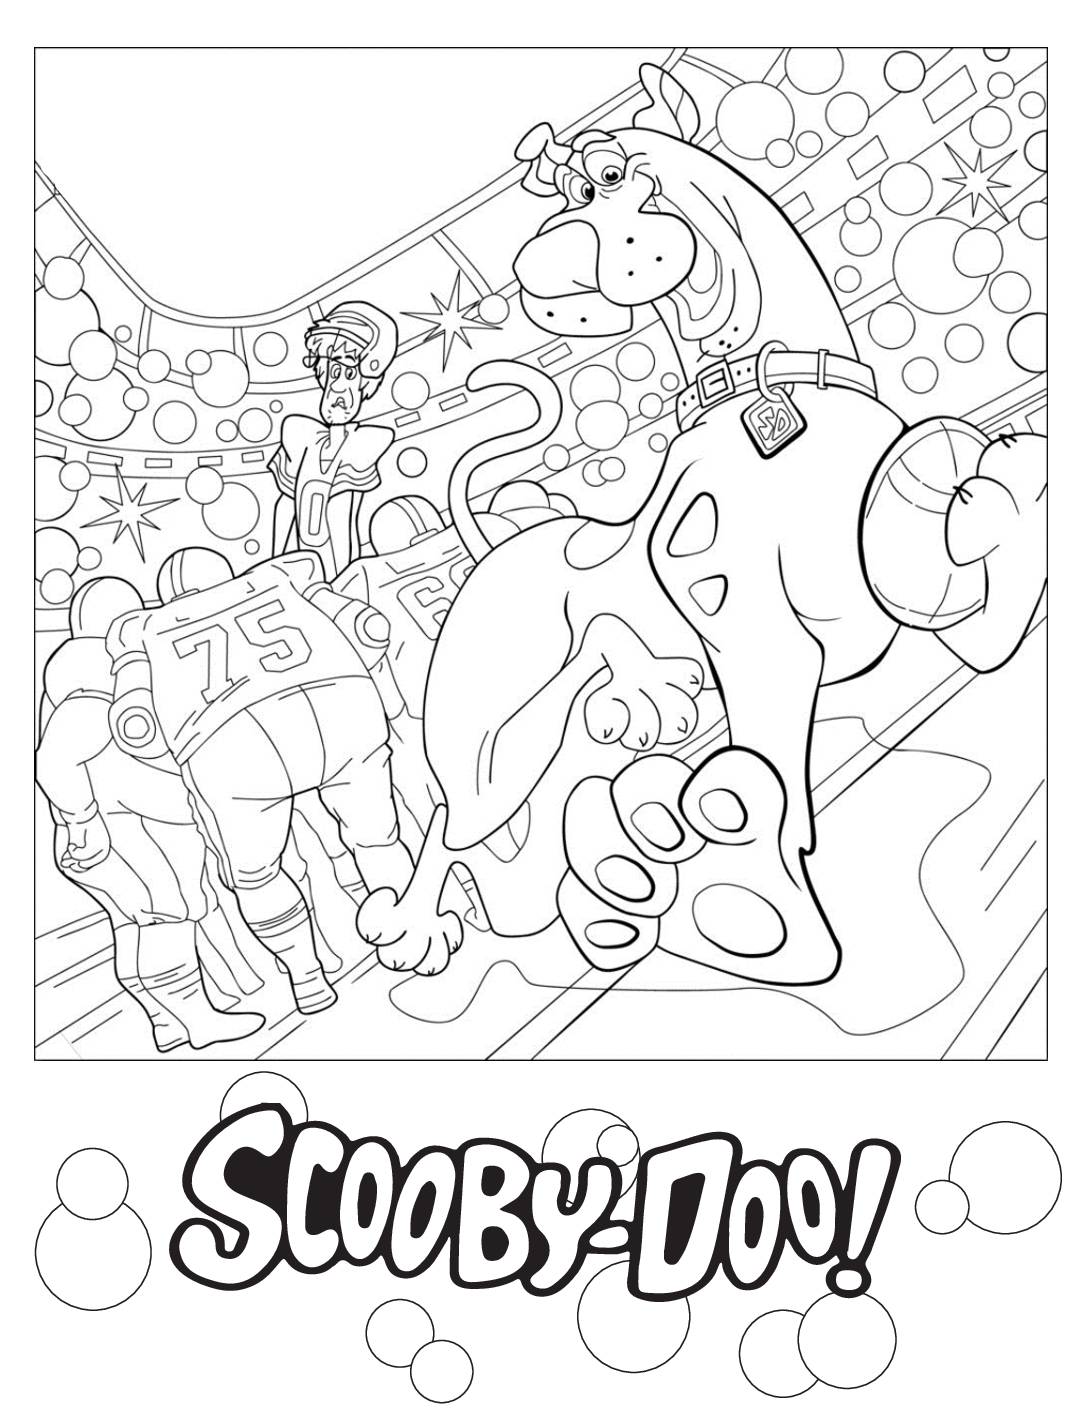 Coloring Page 2 Scooby Doo Coloring Pages